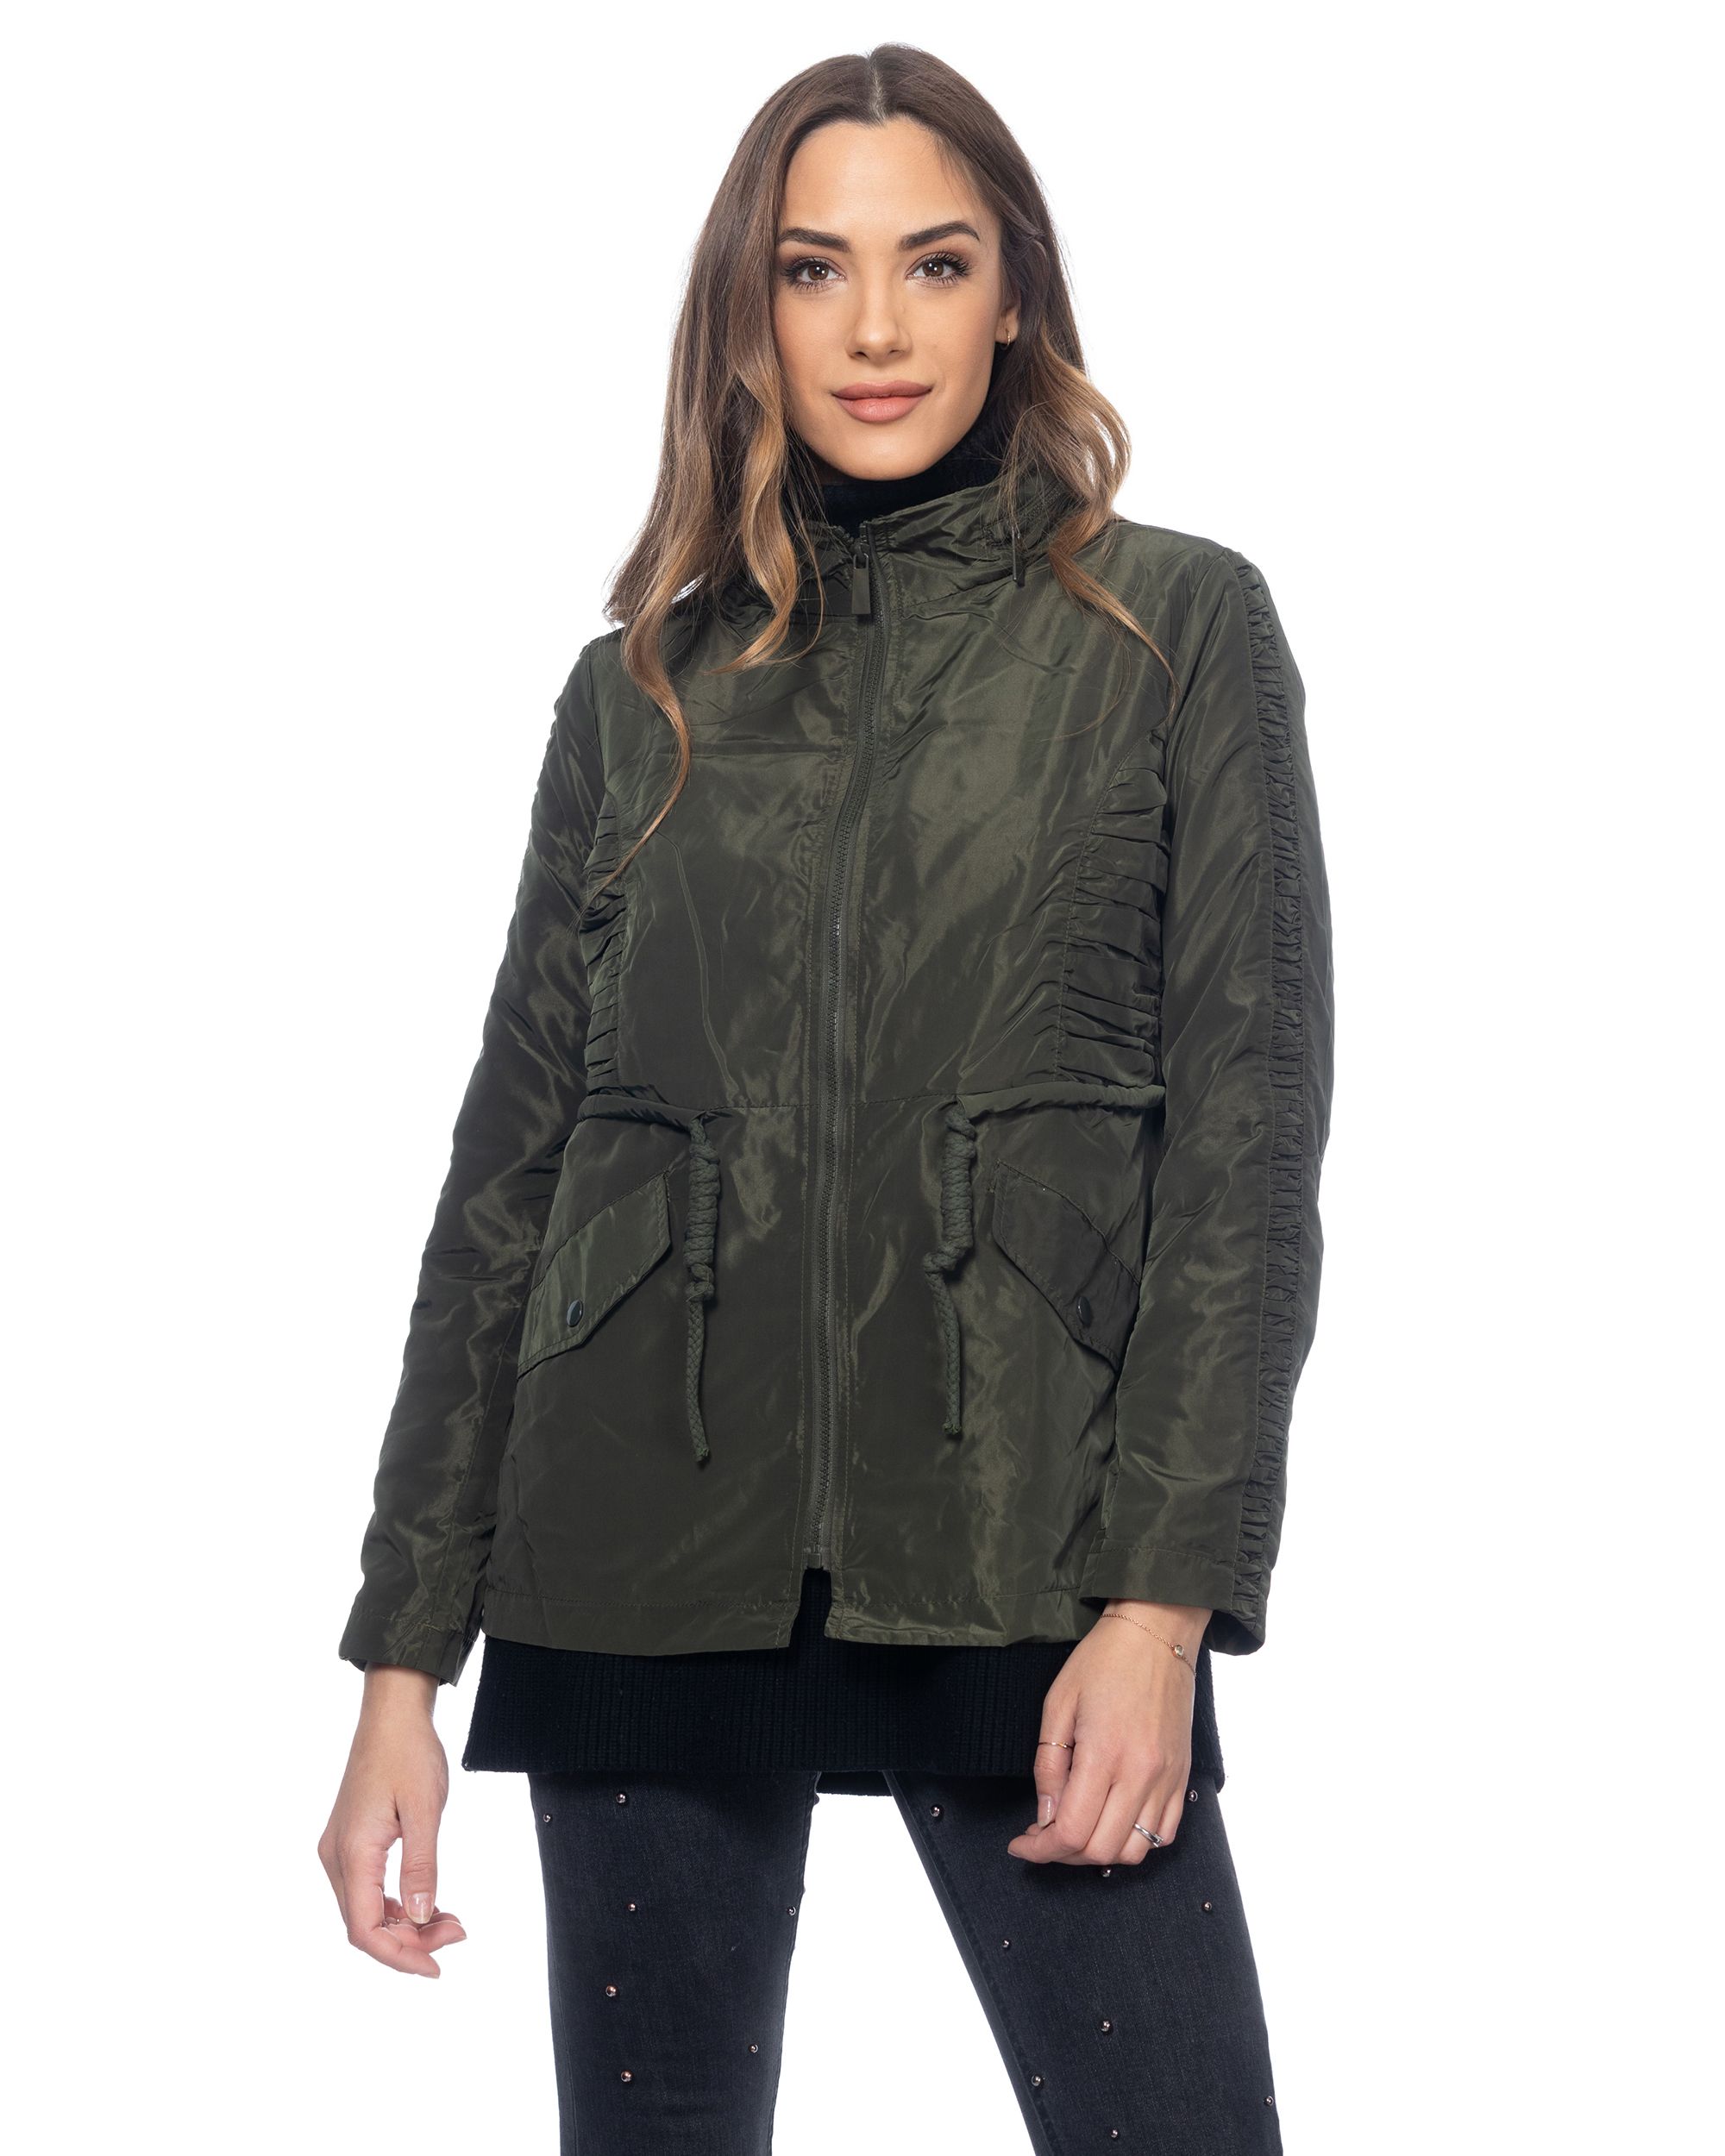 Jacket with zipper clousure and Flap pockets